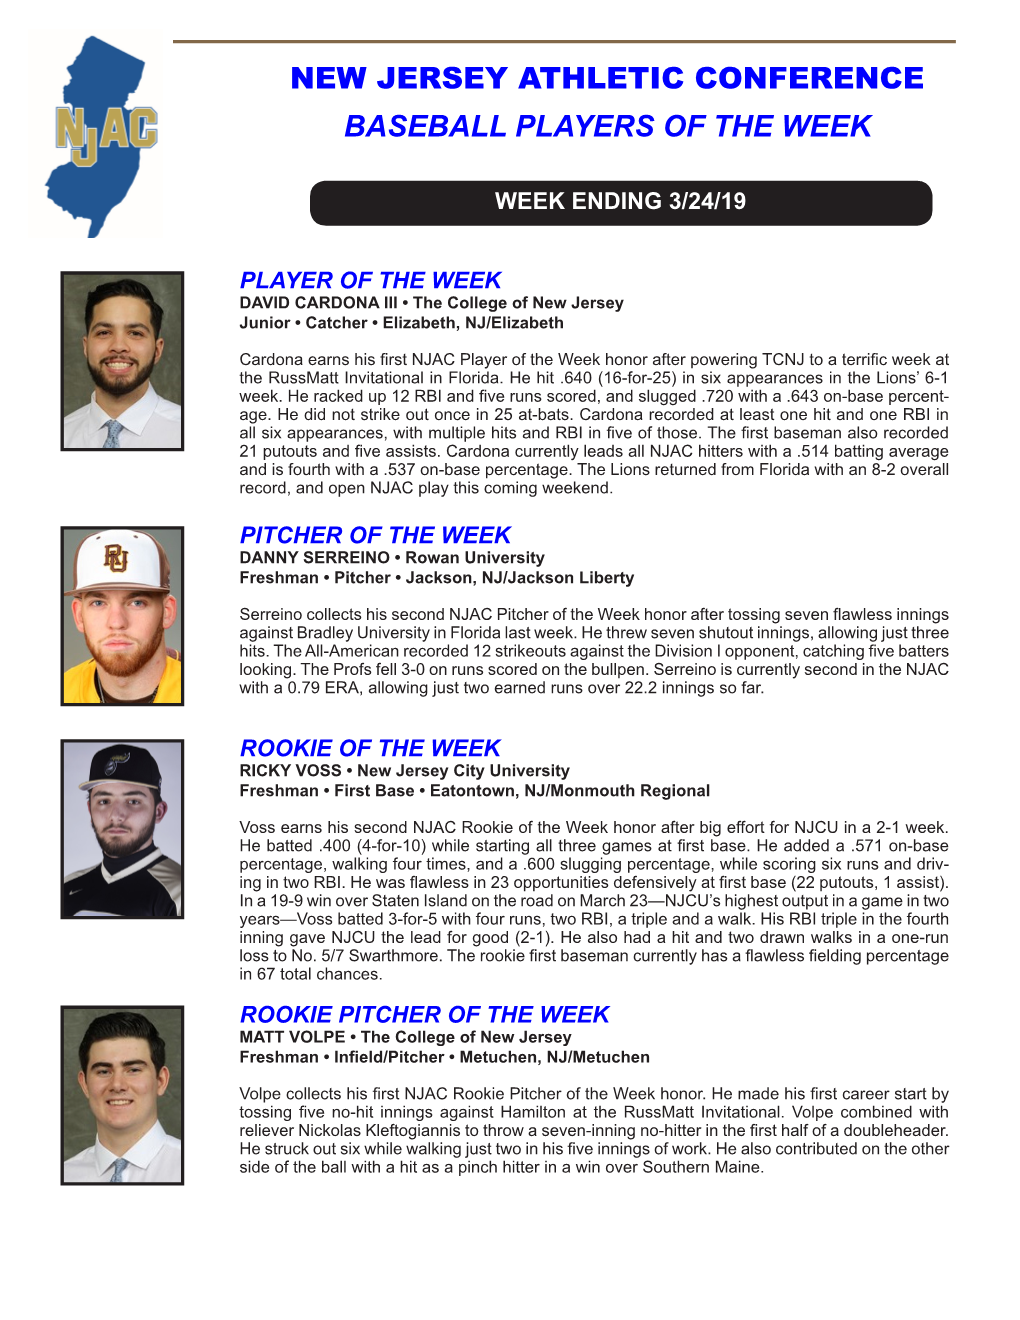 New Jersey Athletic Conference Baseball Players of the Week